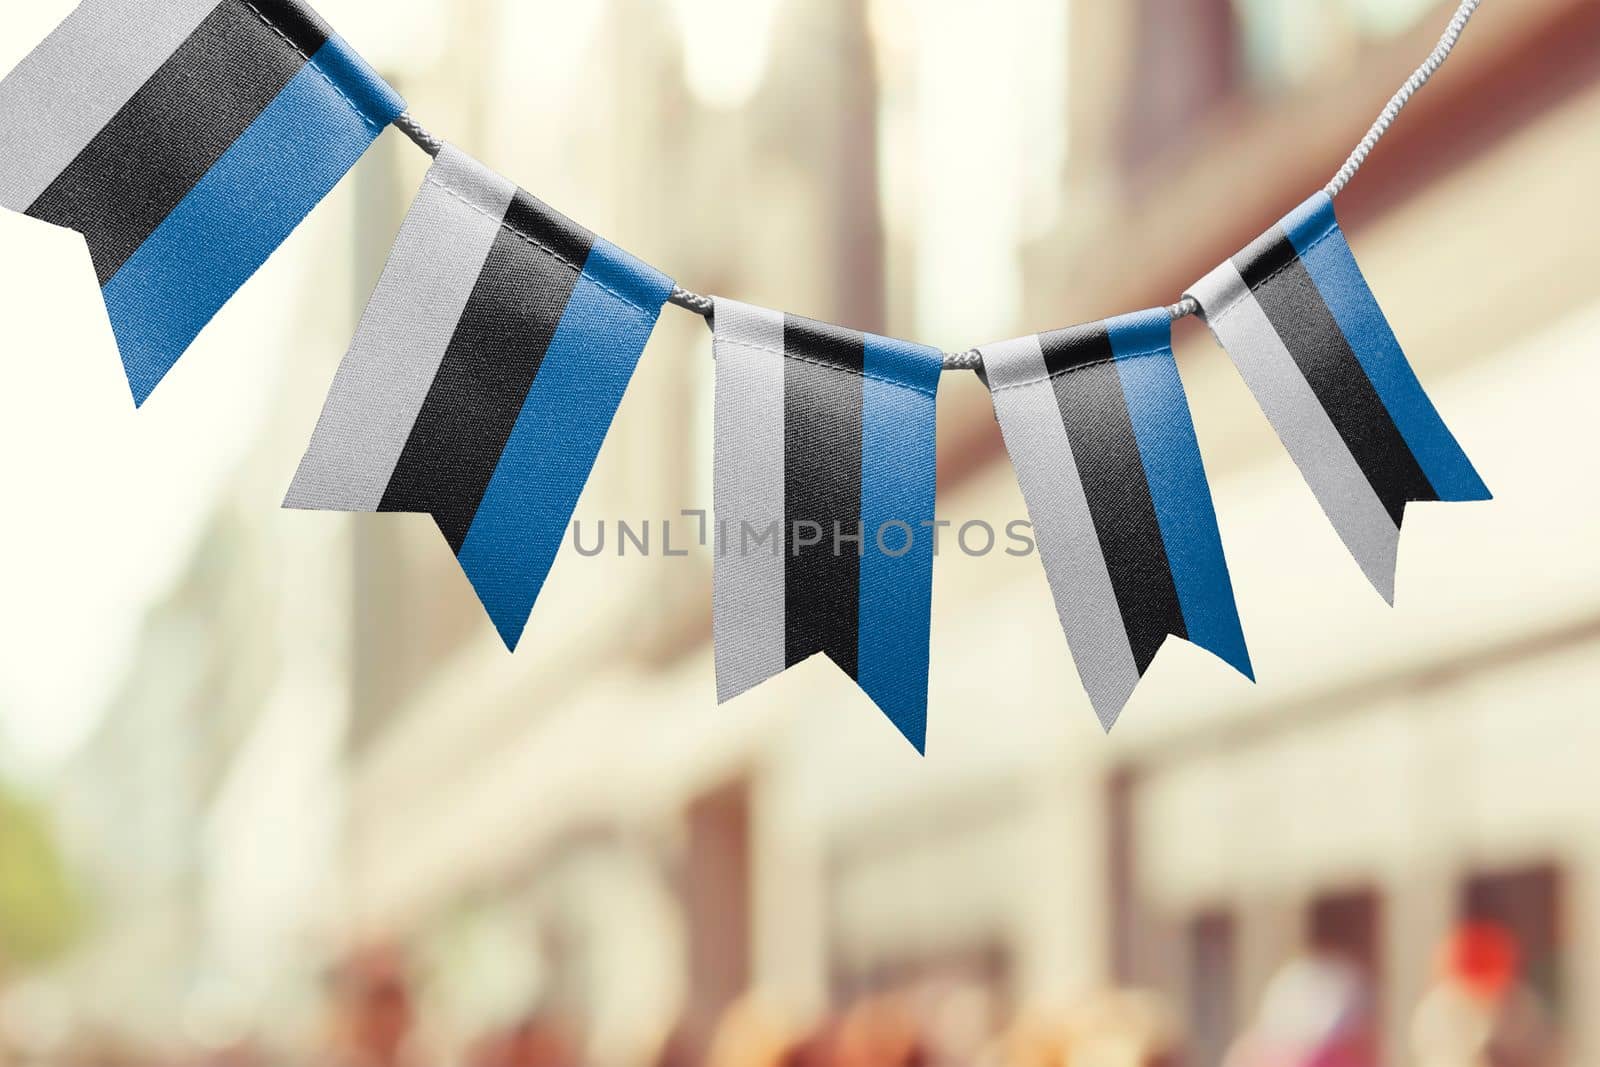 A garland of Estonia national flags on an abstract blurred background.